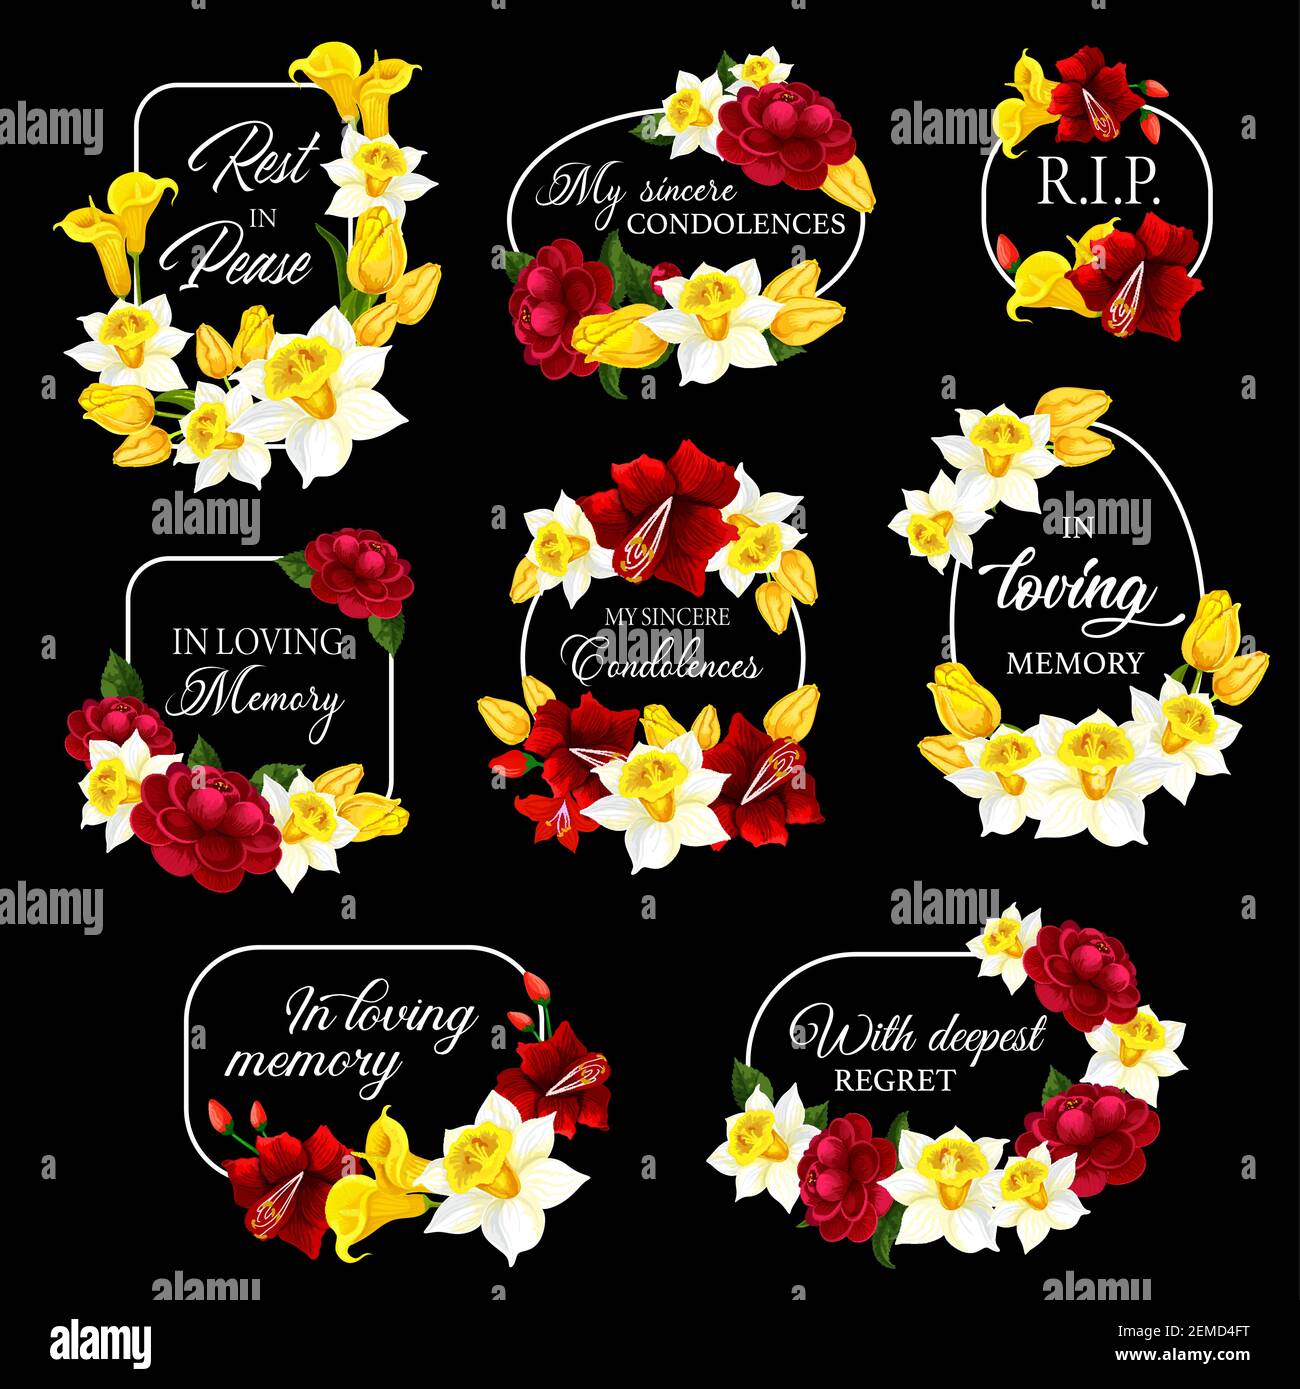 Funeral frames and obituary card borders, vector memorial condolences. Funeral floral frames black plaques for mourning and loving memory, RIP rest in Stock Vector